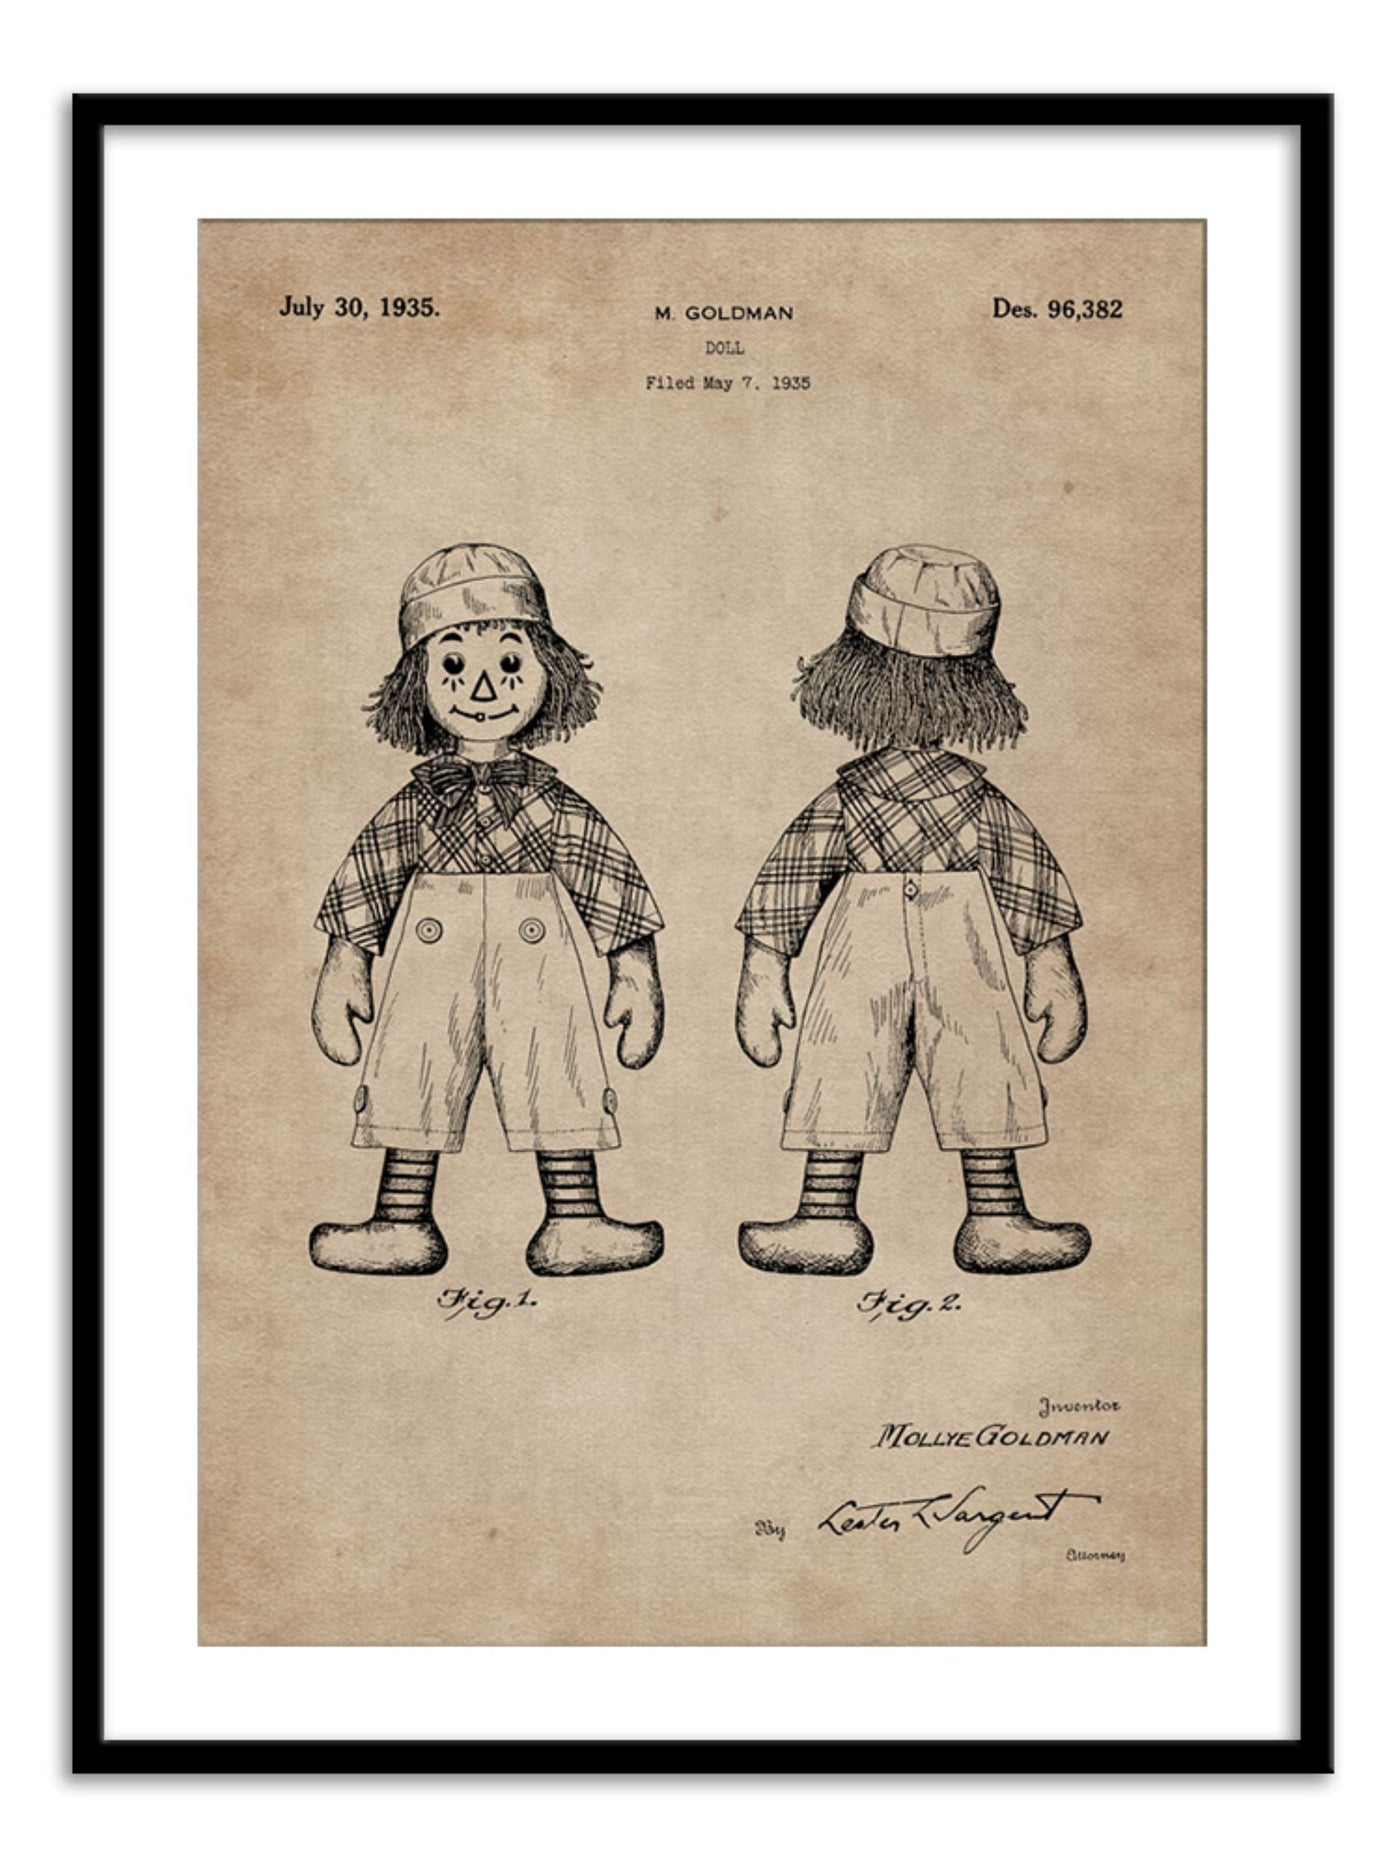 Patent Document of a Doll Wall Prints